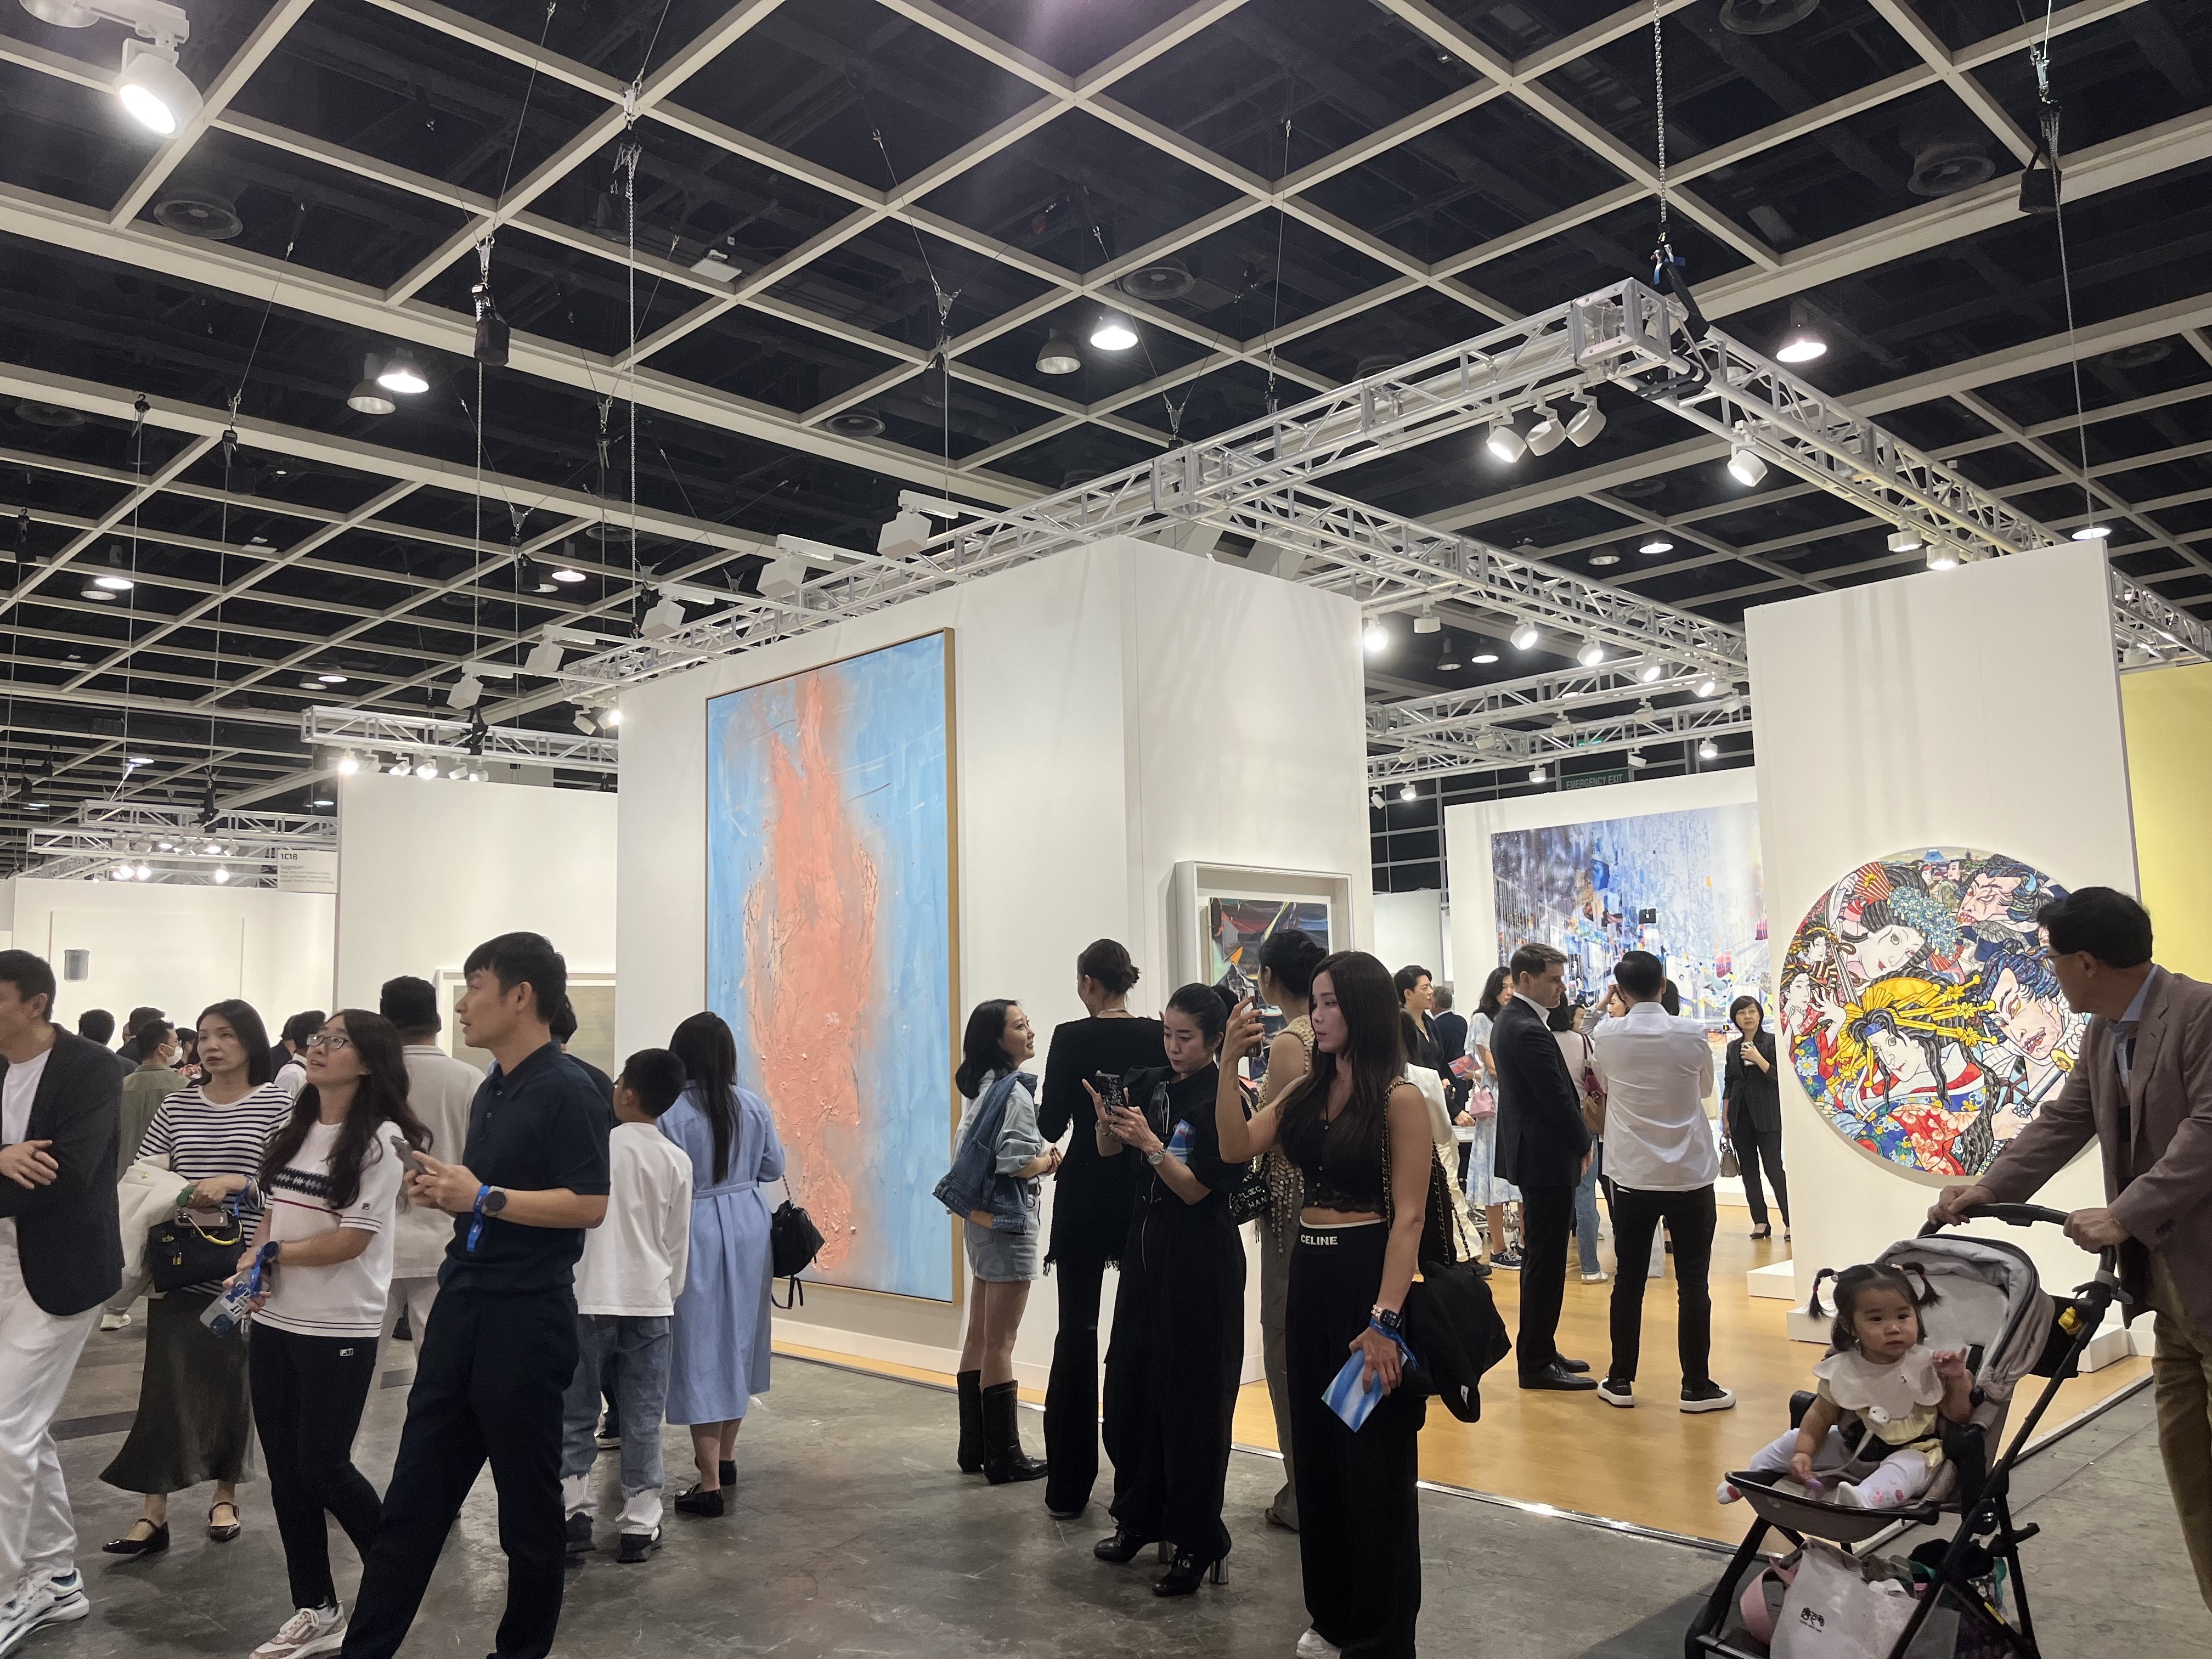 VIPs attend the opening day of the Art Basel Hong Kong contemporary art fair at the Hong Kong Convention and Exhibition Centre. The fair has returned to its pre-pandemic scale, with 242 galleries from 40 countries and territories exhibiting. Photo: Mabel Lui